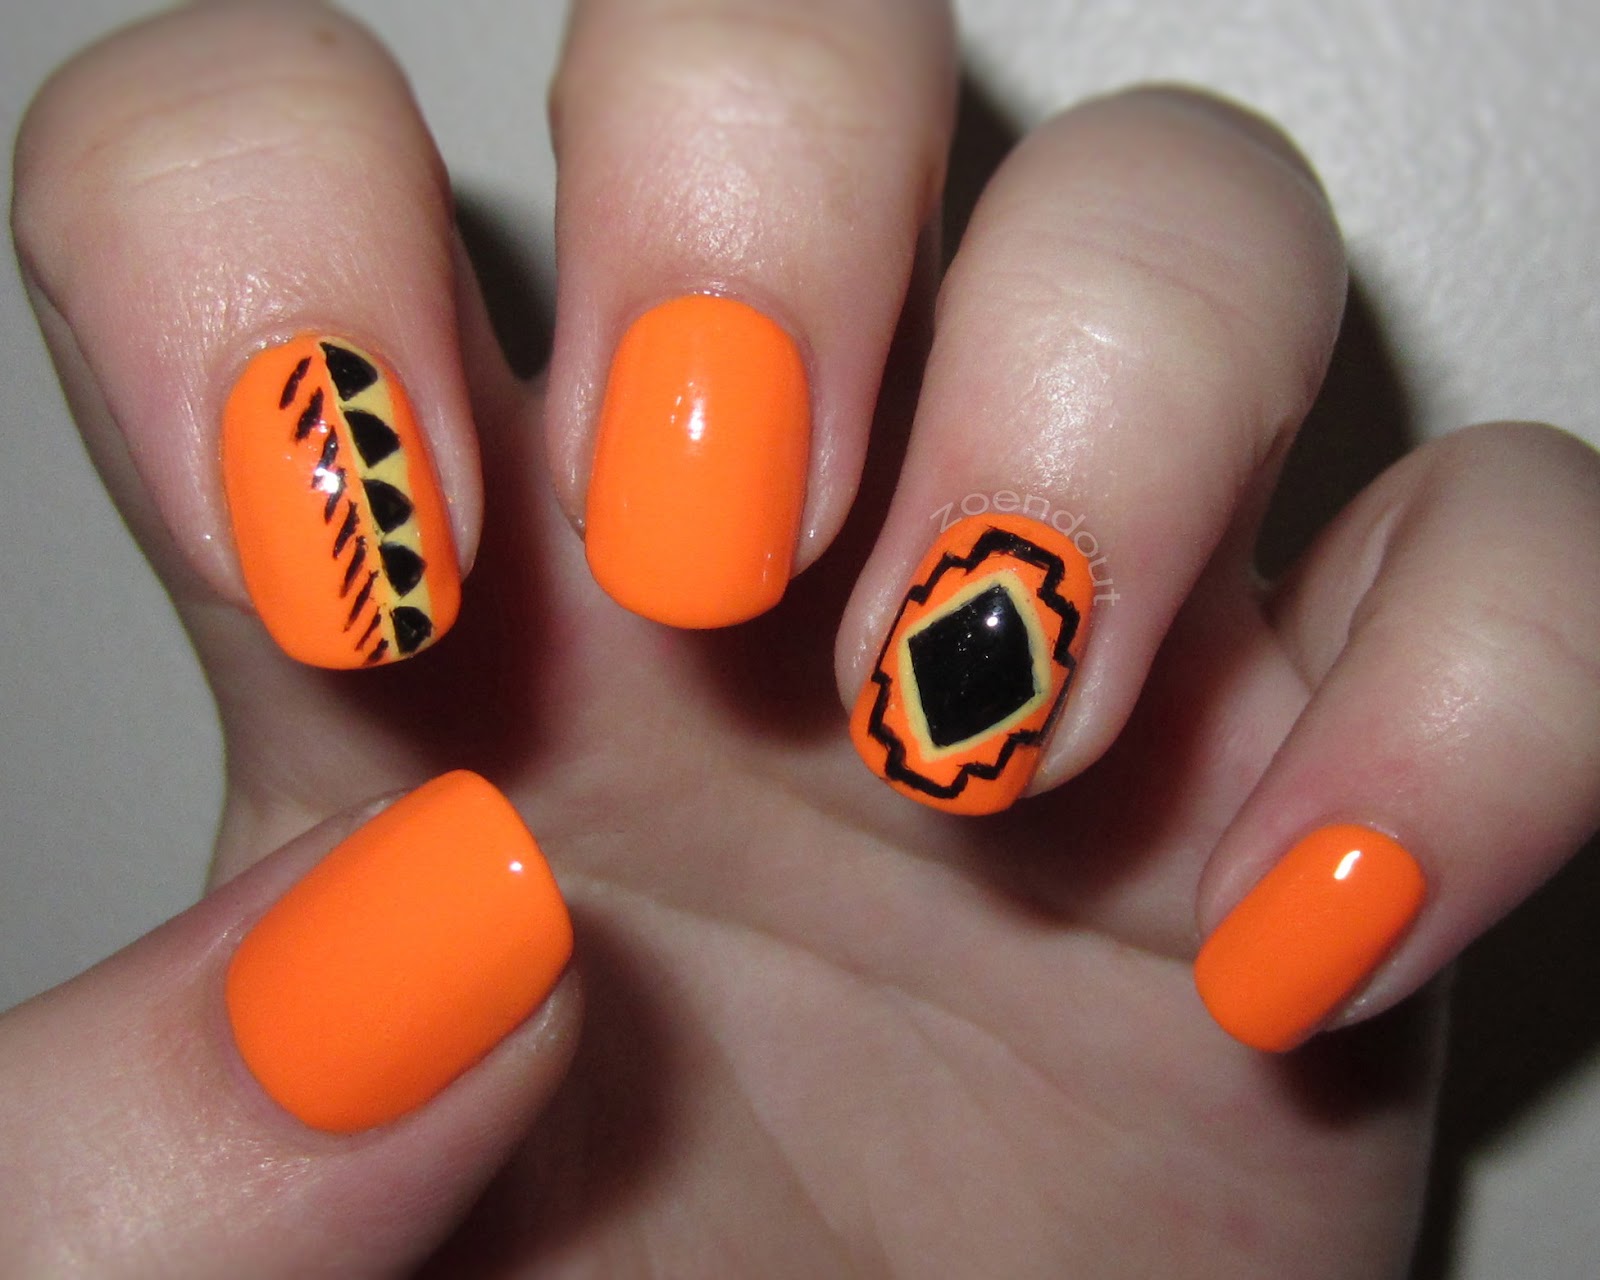 3. Tribal Nail Designs for Short Nails on Pinterest - wide 2